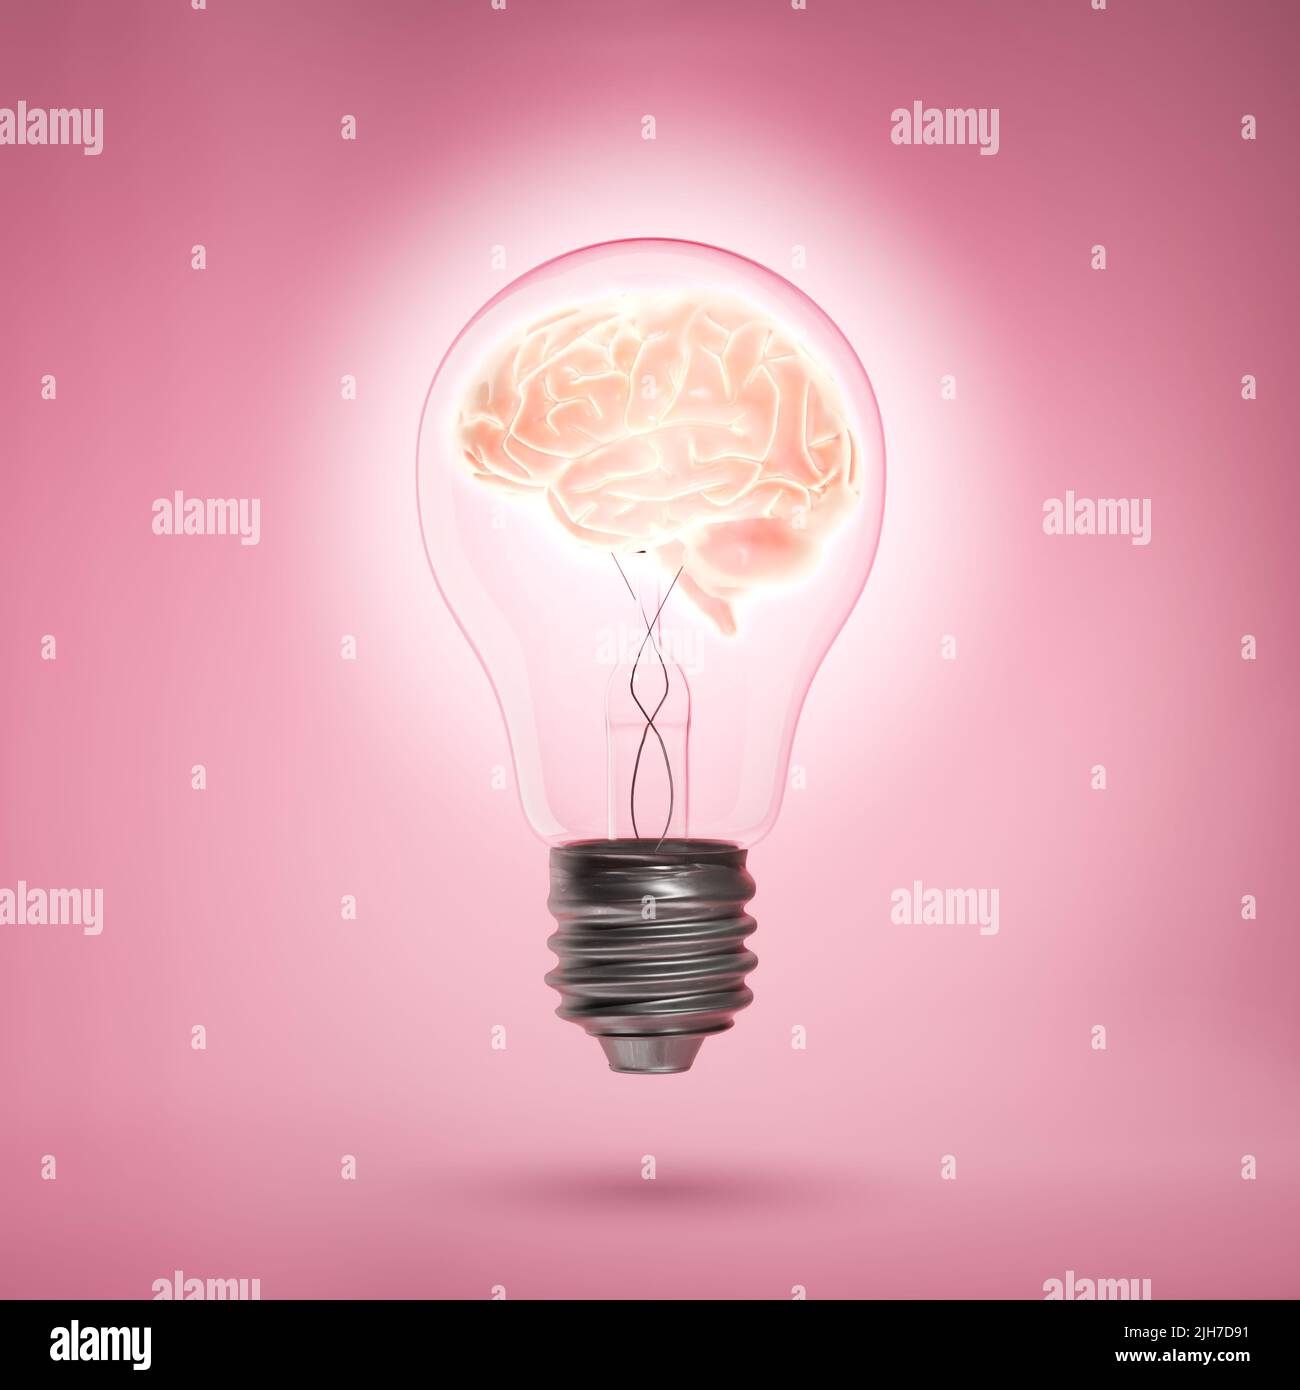 Premium Photo  Yellow light bulb inside white light bulb on pink  background creative thinking ideas and innovation concept 3d rendering  illustration